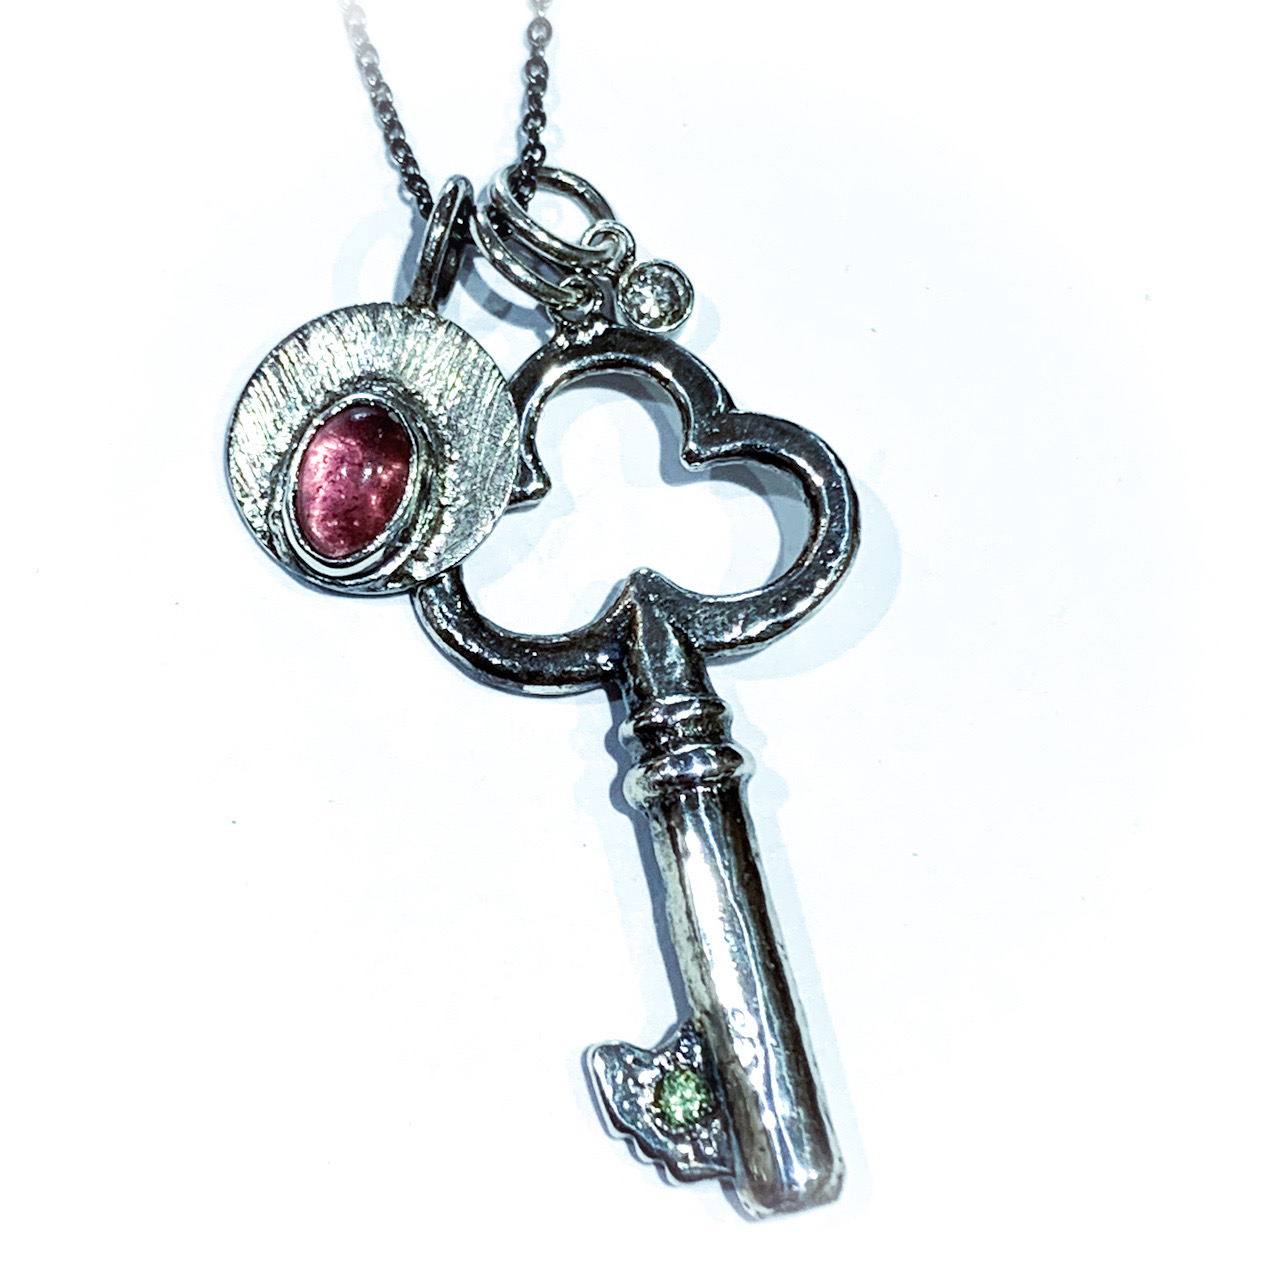 Gemstone Exposed Weld Necklace Pendant - Salvaged